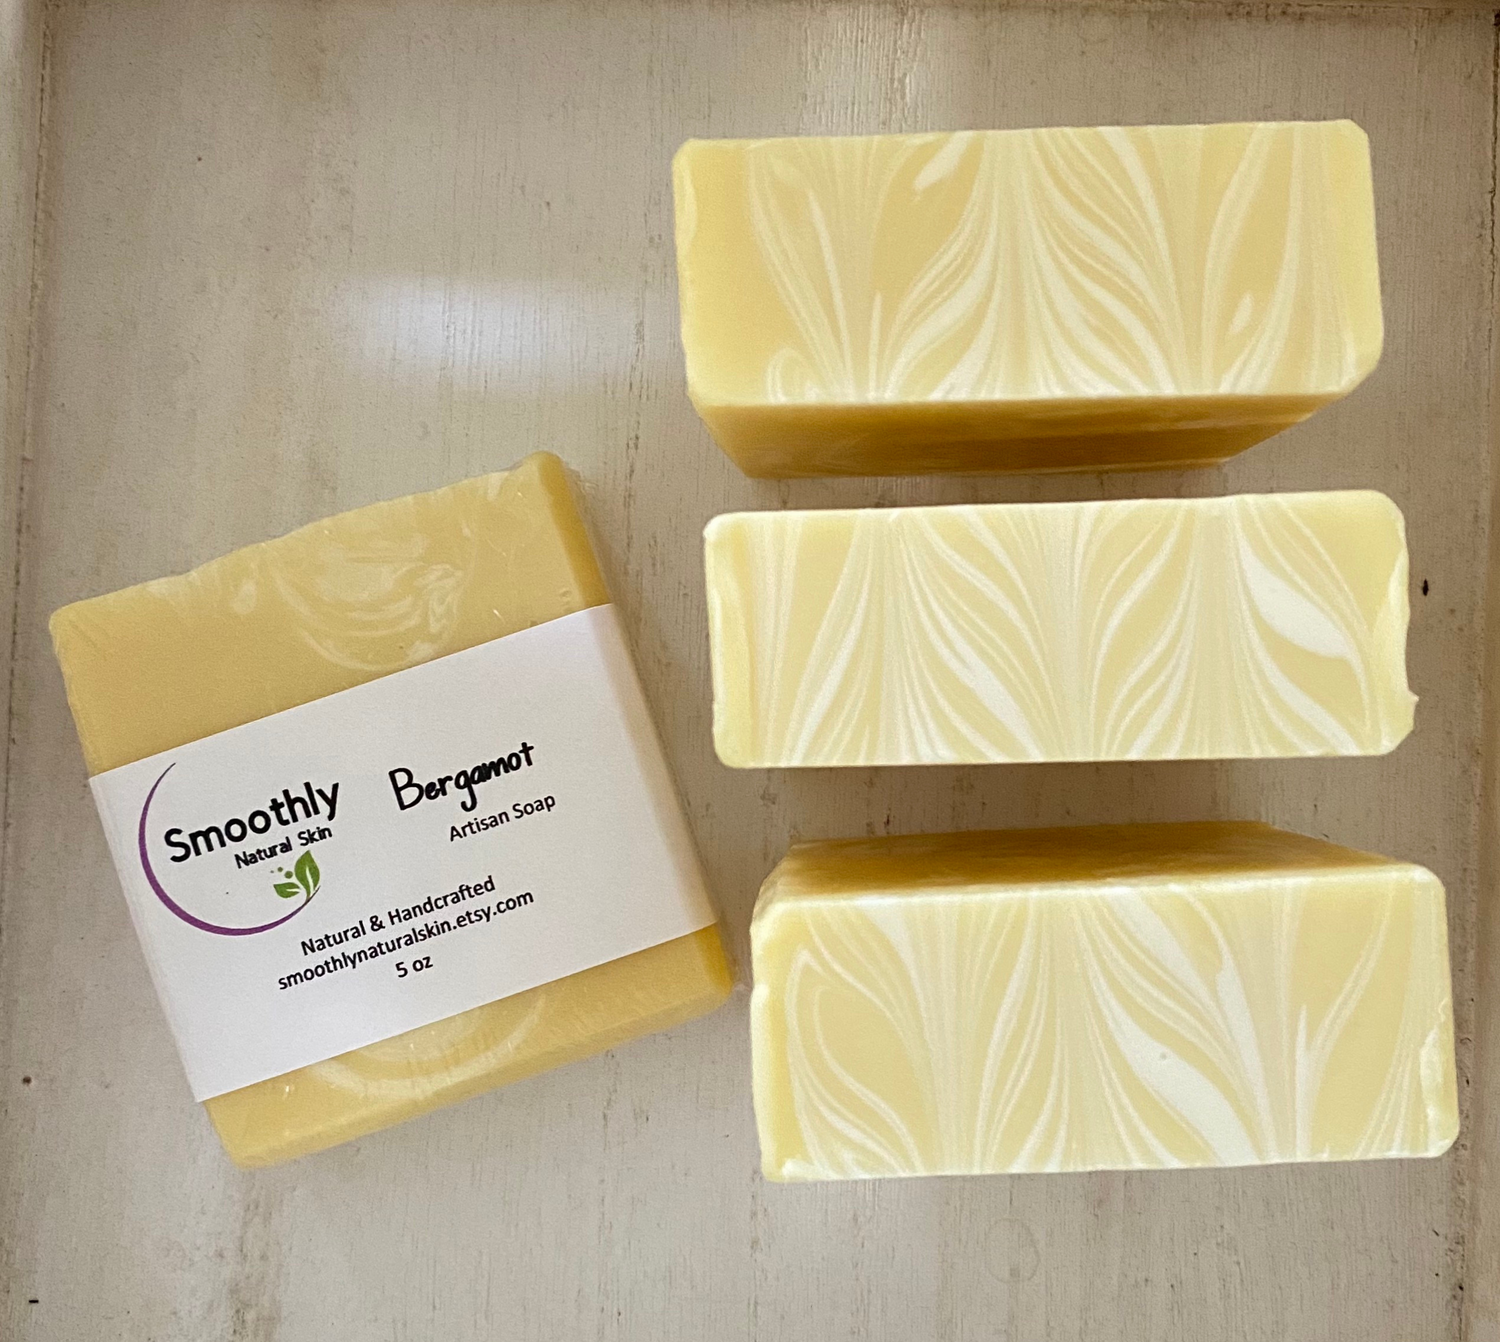 Bergamot Soap is crisp, clean and juicy with a subtle floralcy; the citrus jewel of the Mediterranean (bergamot essential oil) is uplifting and bright. This combination produce a citrus scent. Smoothly Natural Skin 